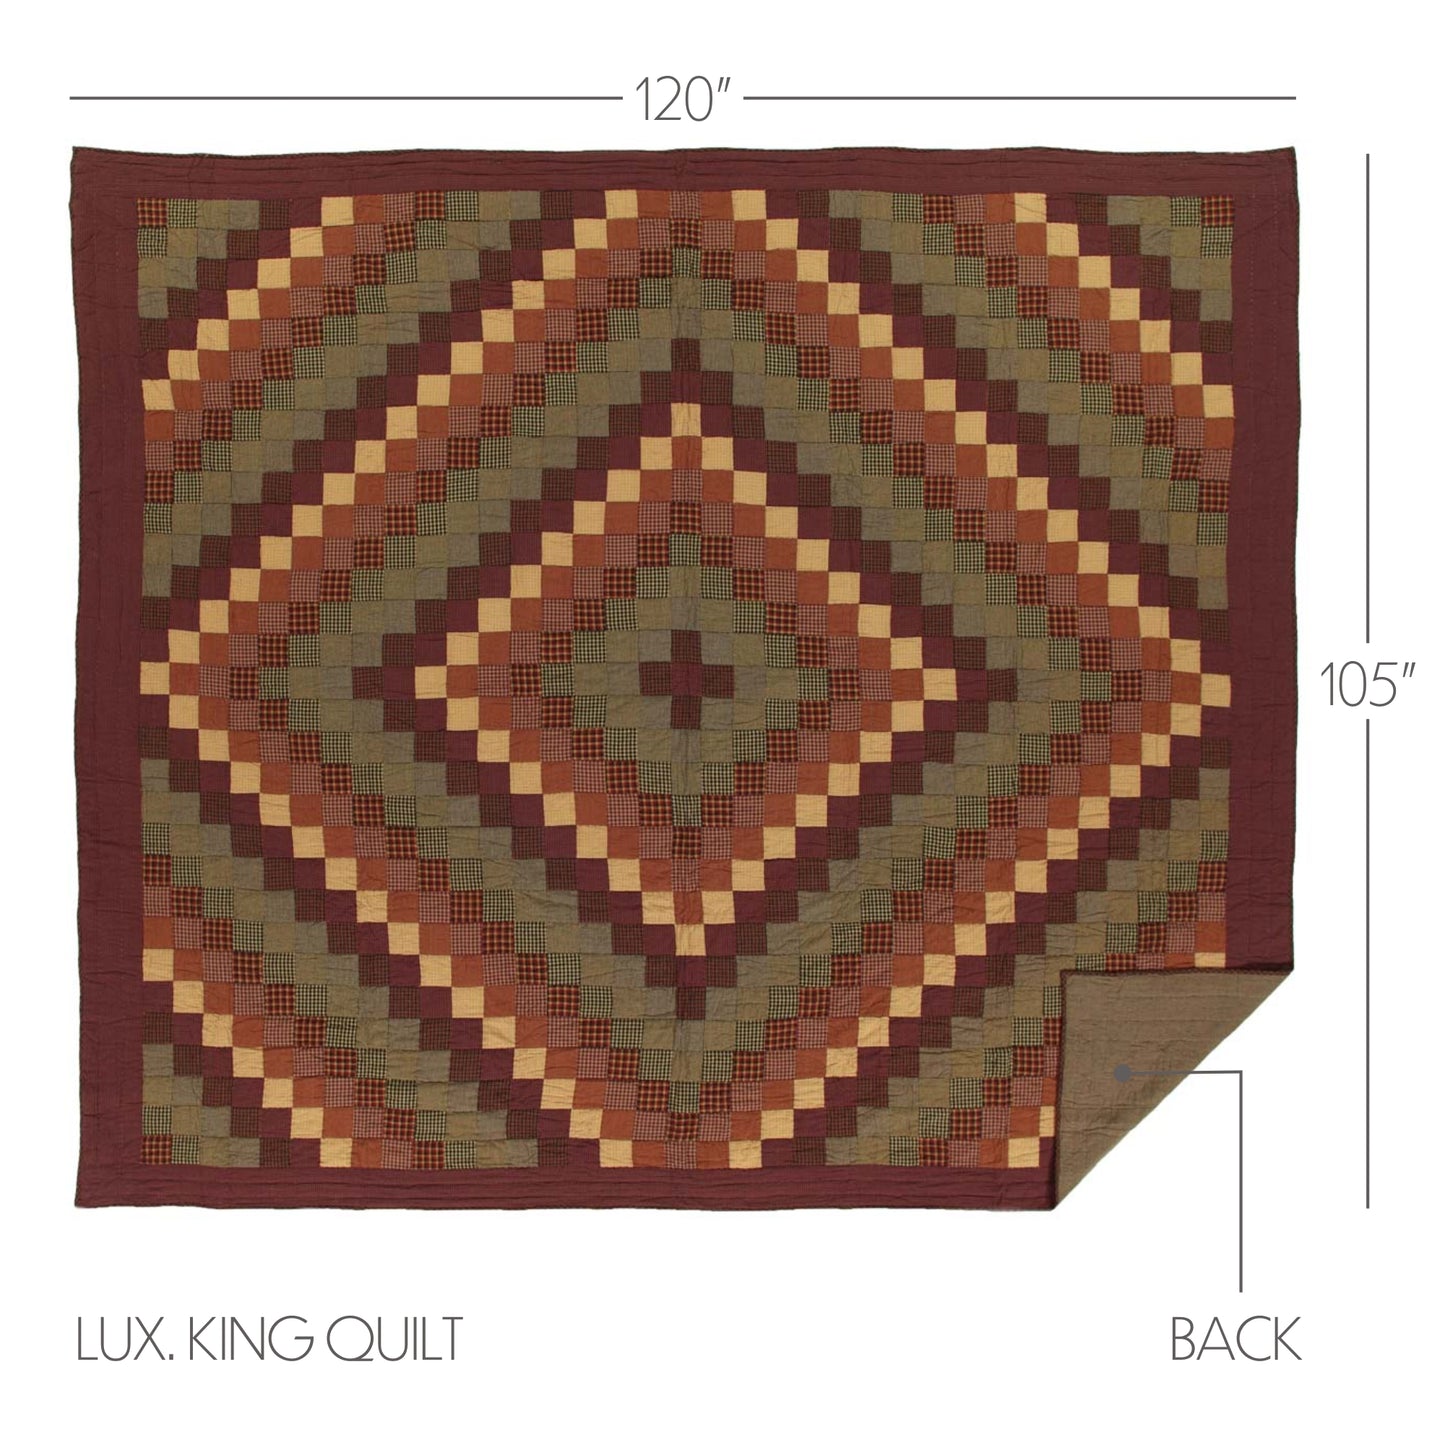 37904-Heritage-Farms-Luxury-King-Quilt-120Wx105L-image-1